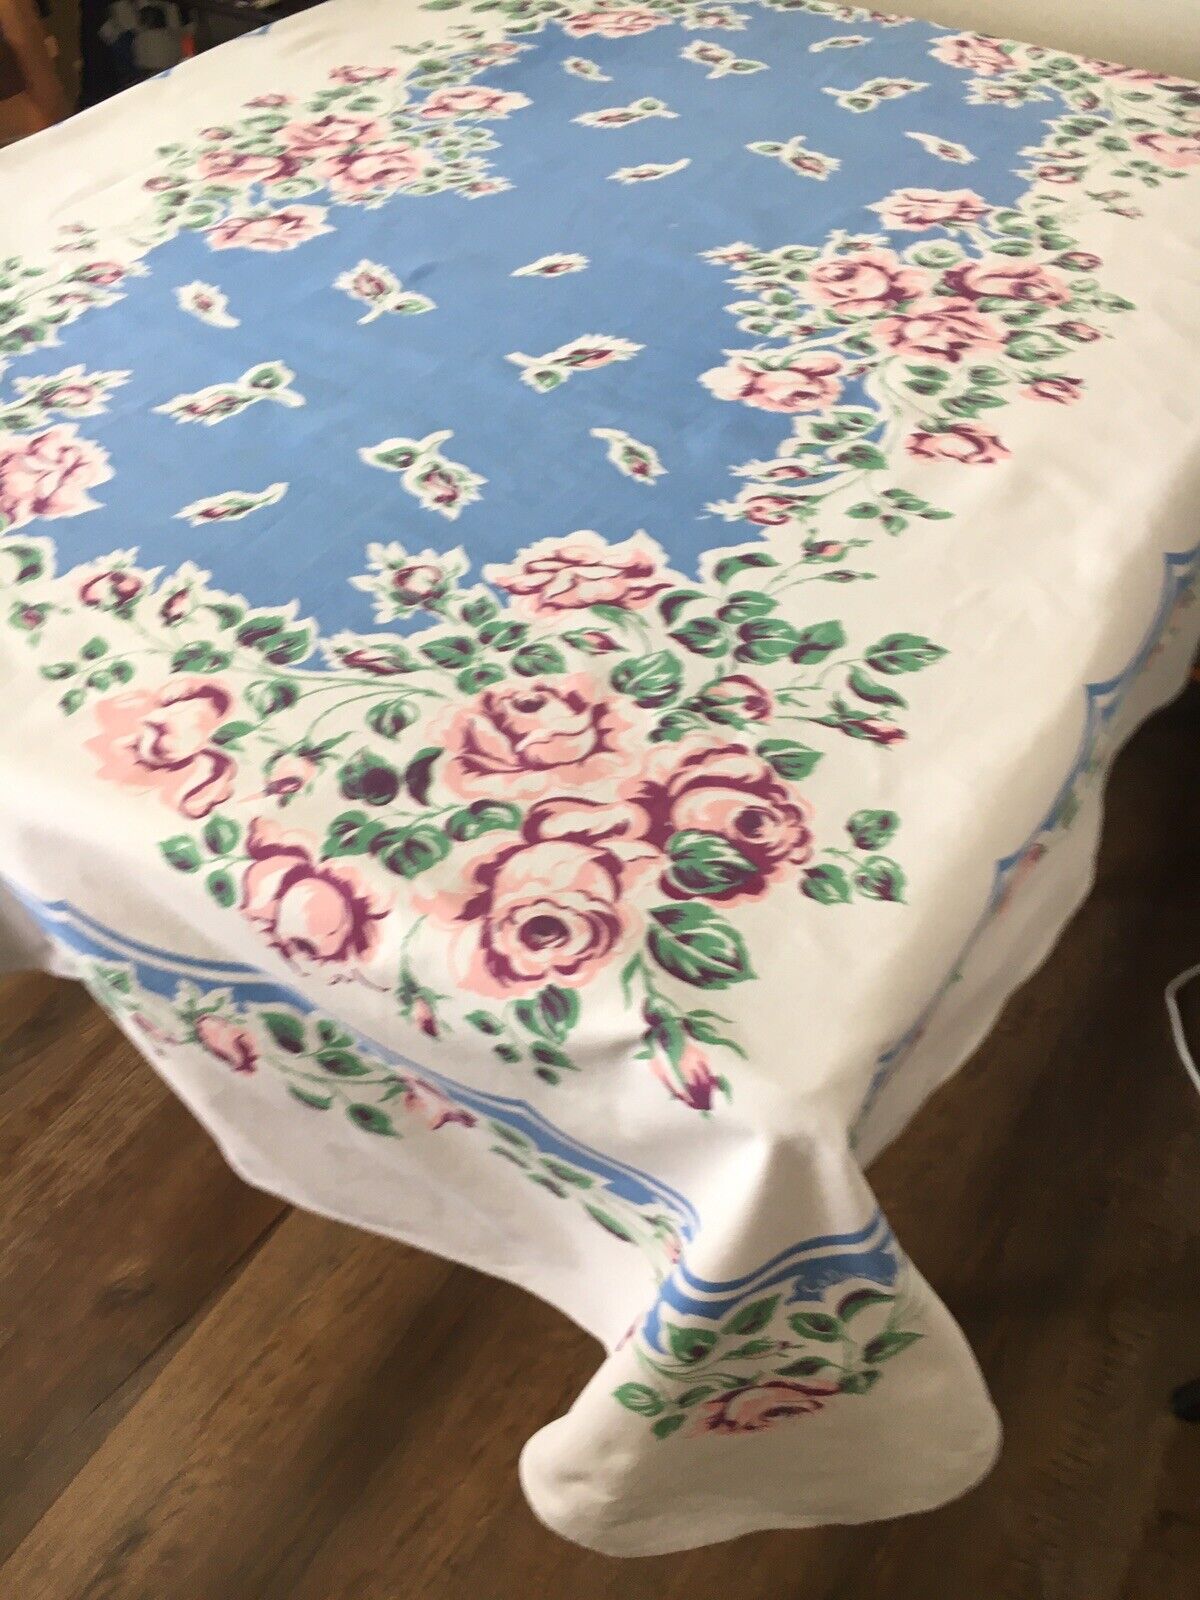 Vintage Callaway Tablecloth  Excellent Condition No Stains Or Holes 50”x66”blues